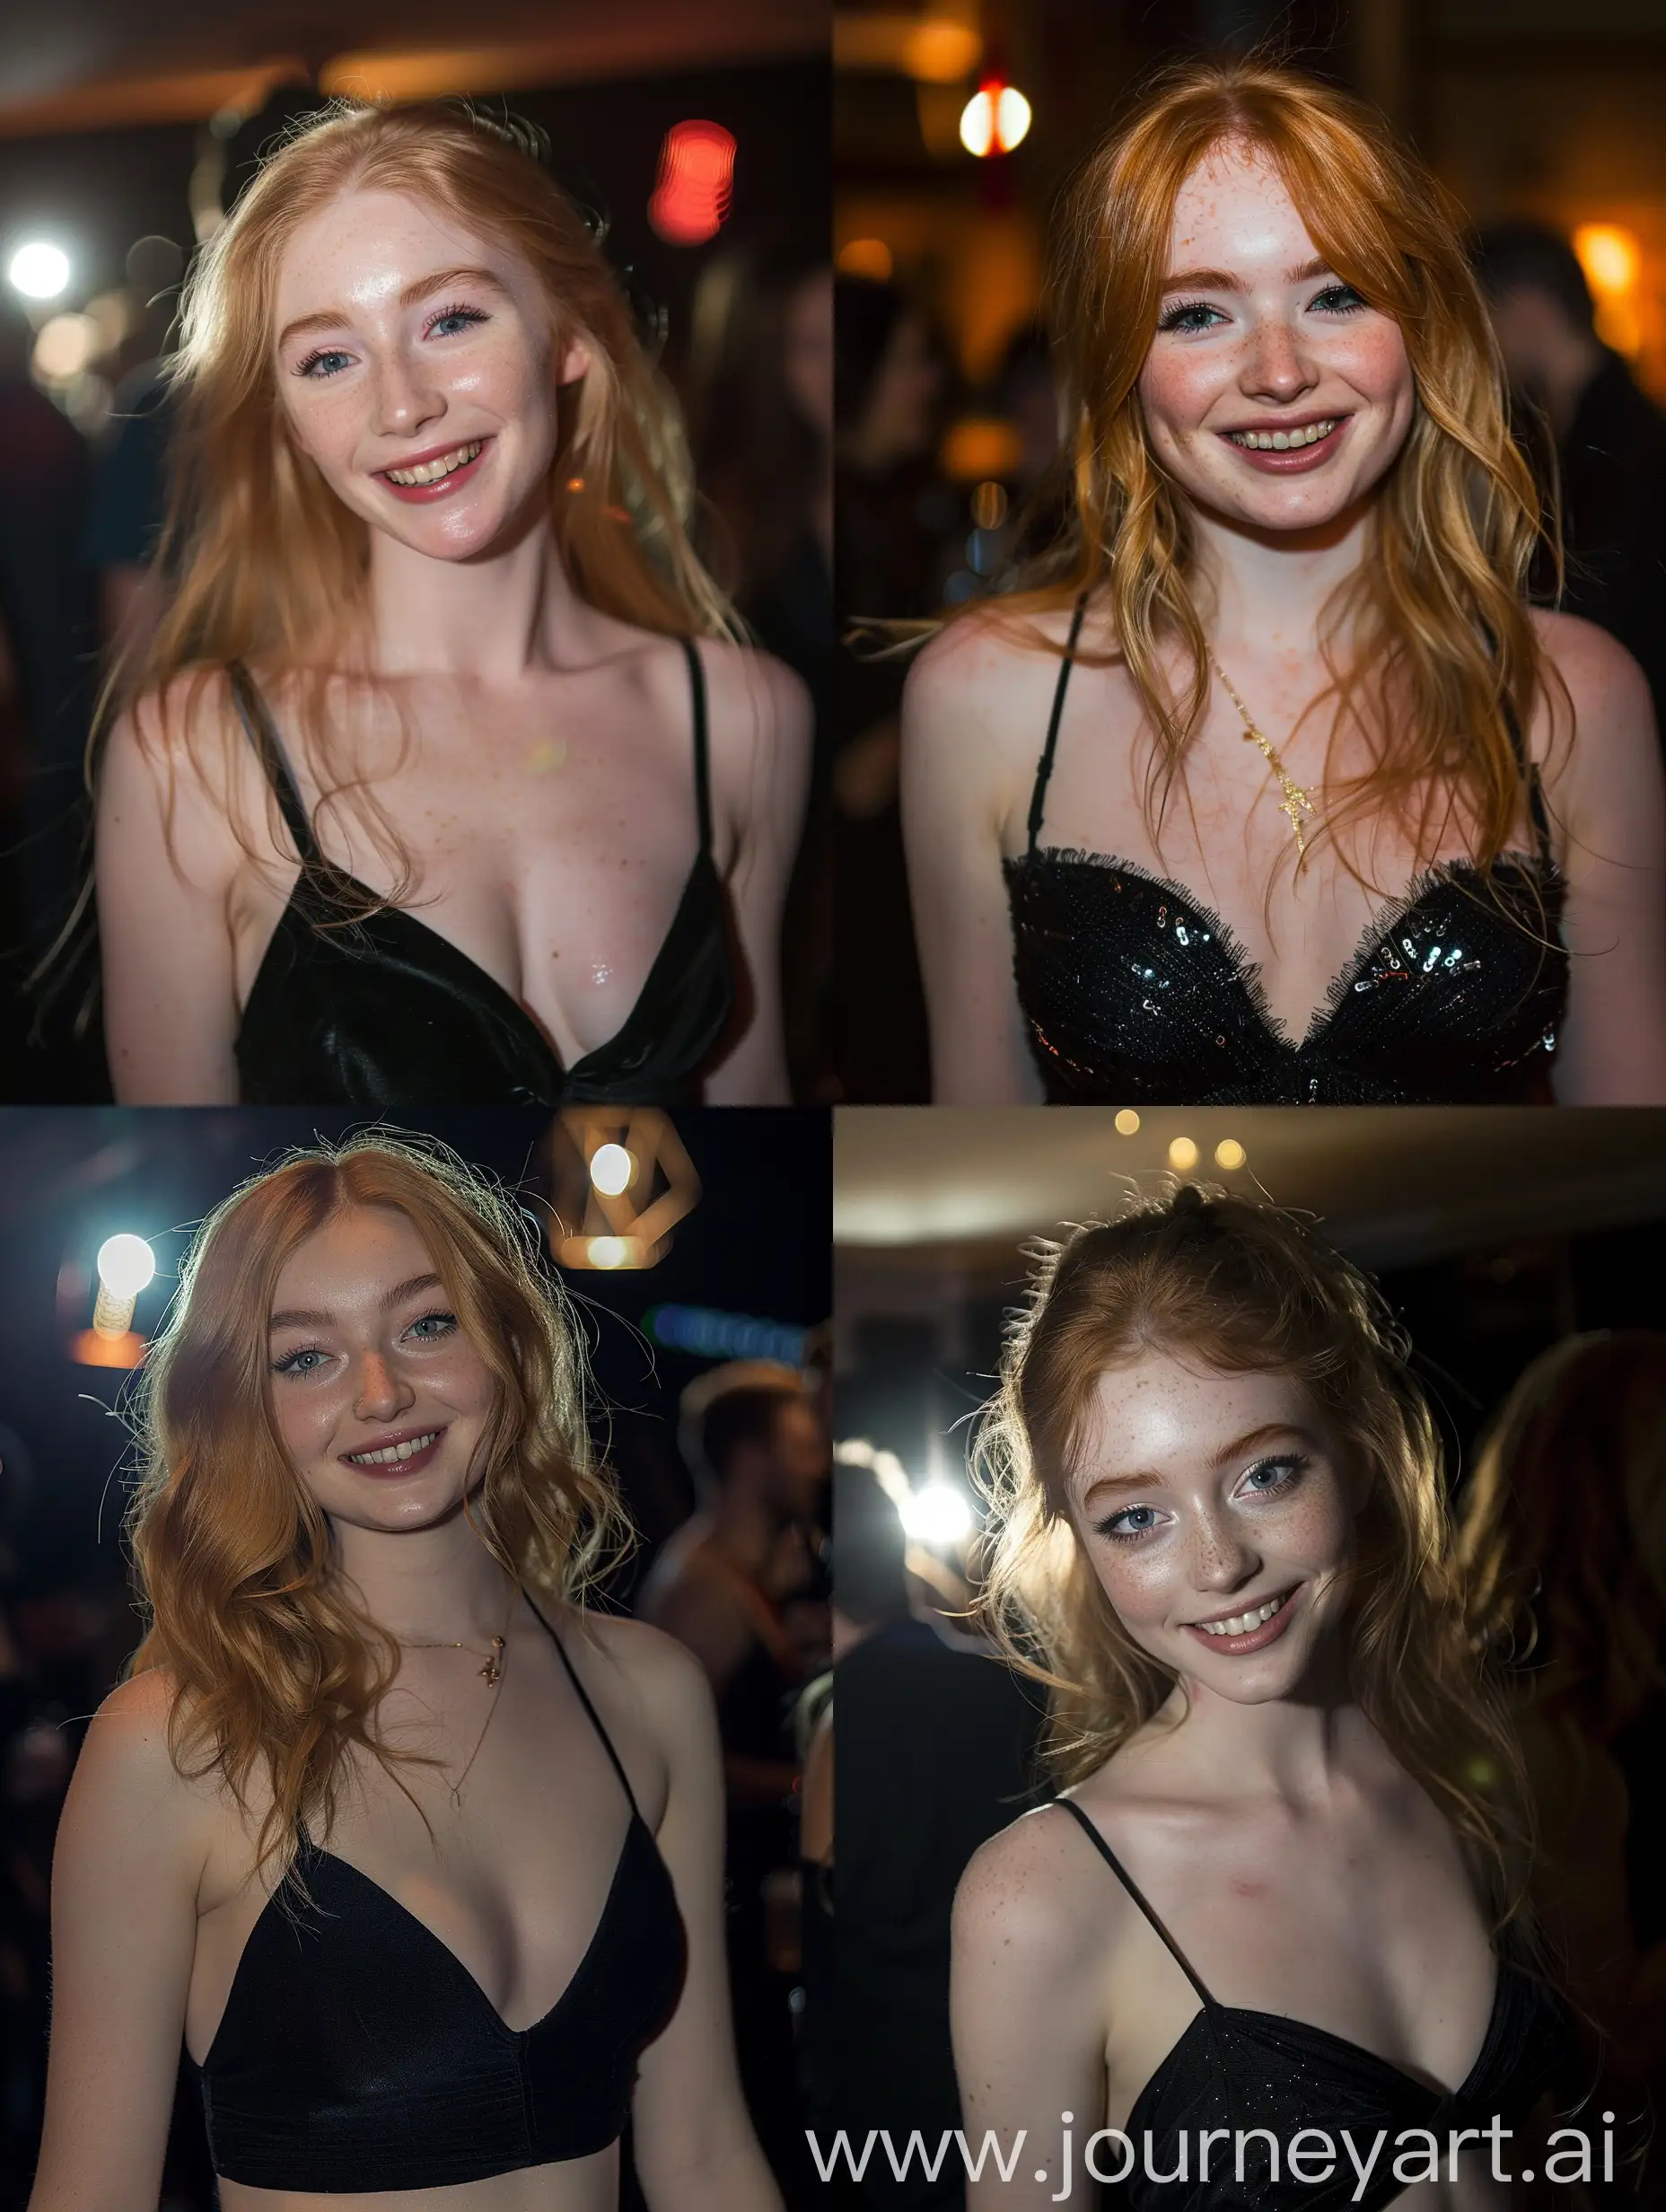 Smiling-Scottish-Redhead-Girl-in-Black-Dress-at-Night-Party